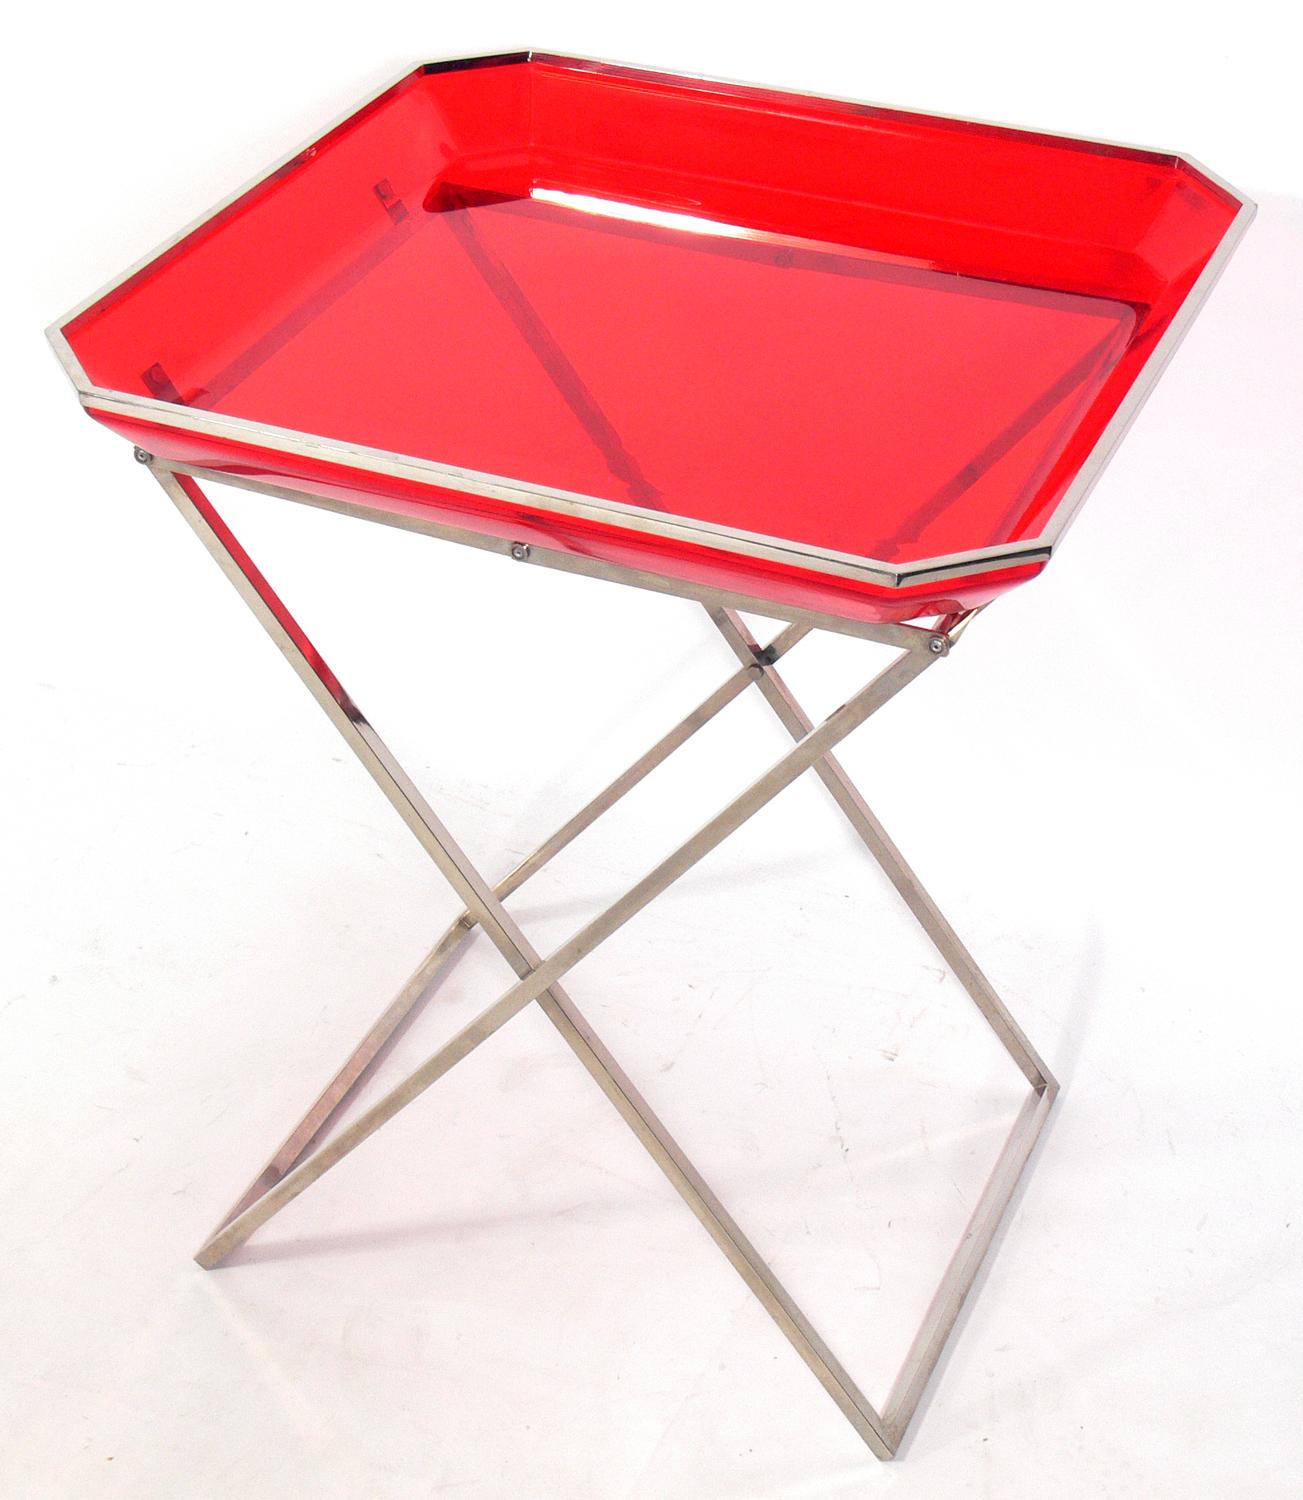 Nickel and acrylic bar cart, French, circa 1970s. It is versatile size with a removable tray and folding base and can be used as a bar cart or serving table.